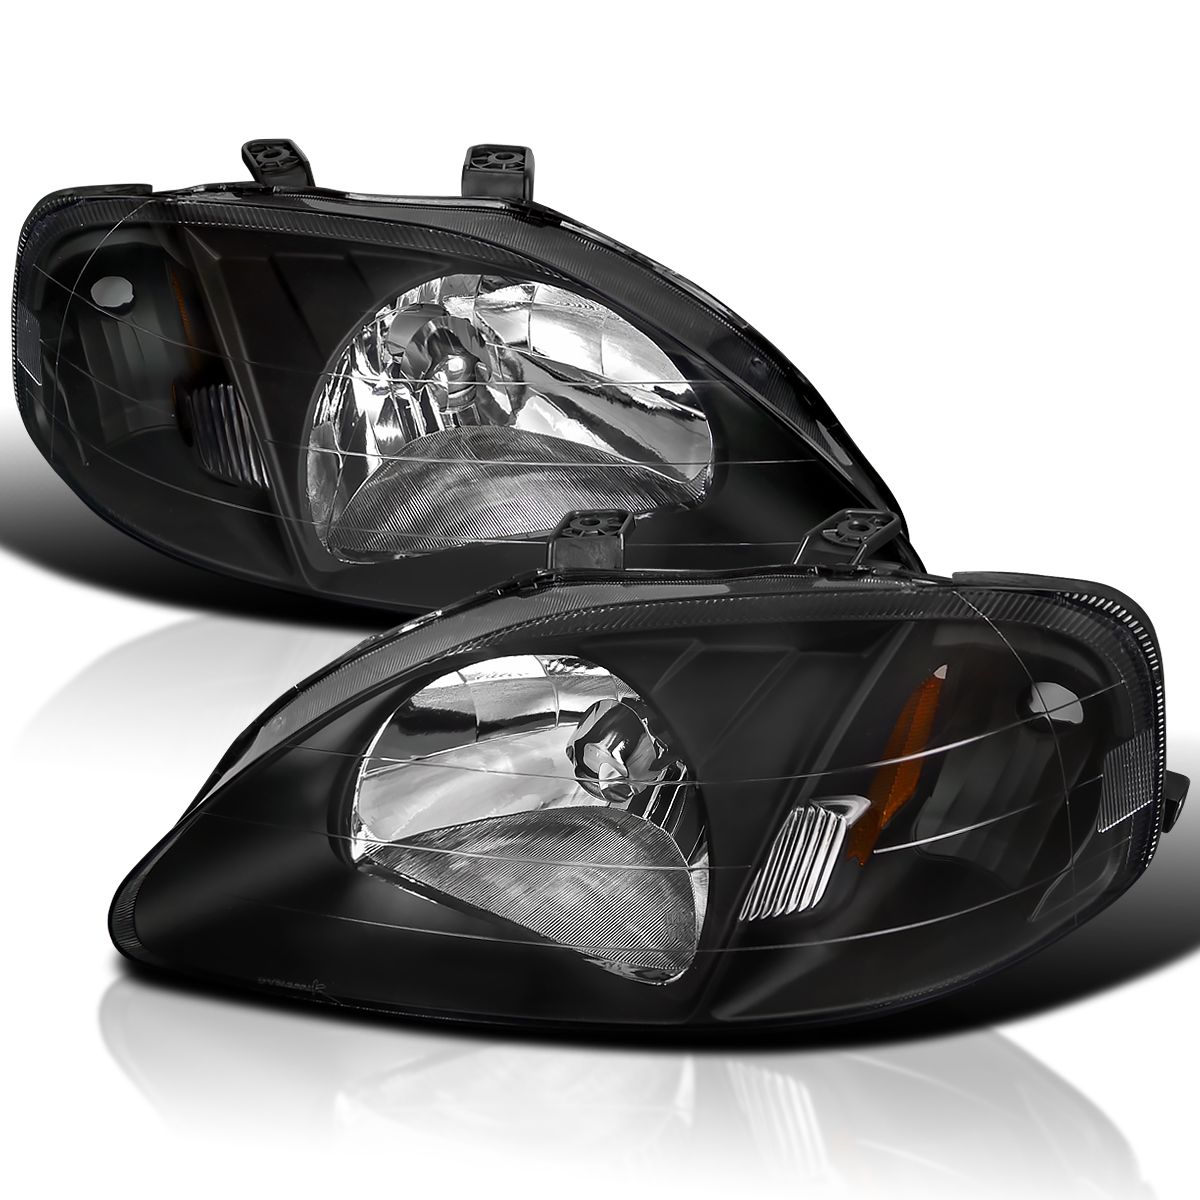 Spec-D Tuning Black Headlights Compatible with 1999-2000 Honda Civic EK EX LX Si L+R Pair Head Light Lamp Assembly - image 1 of 6